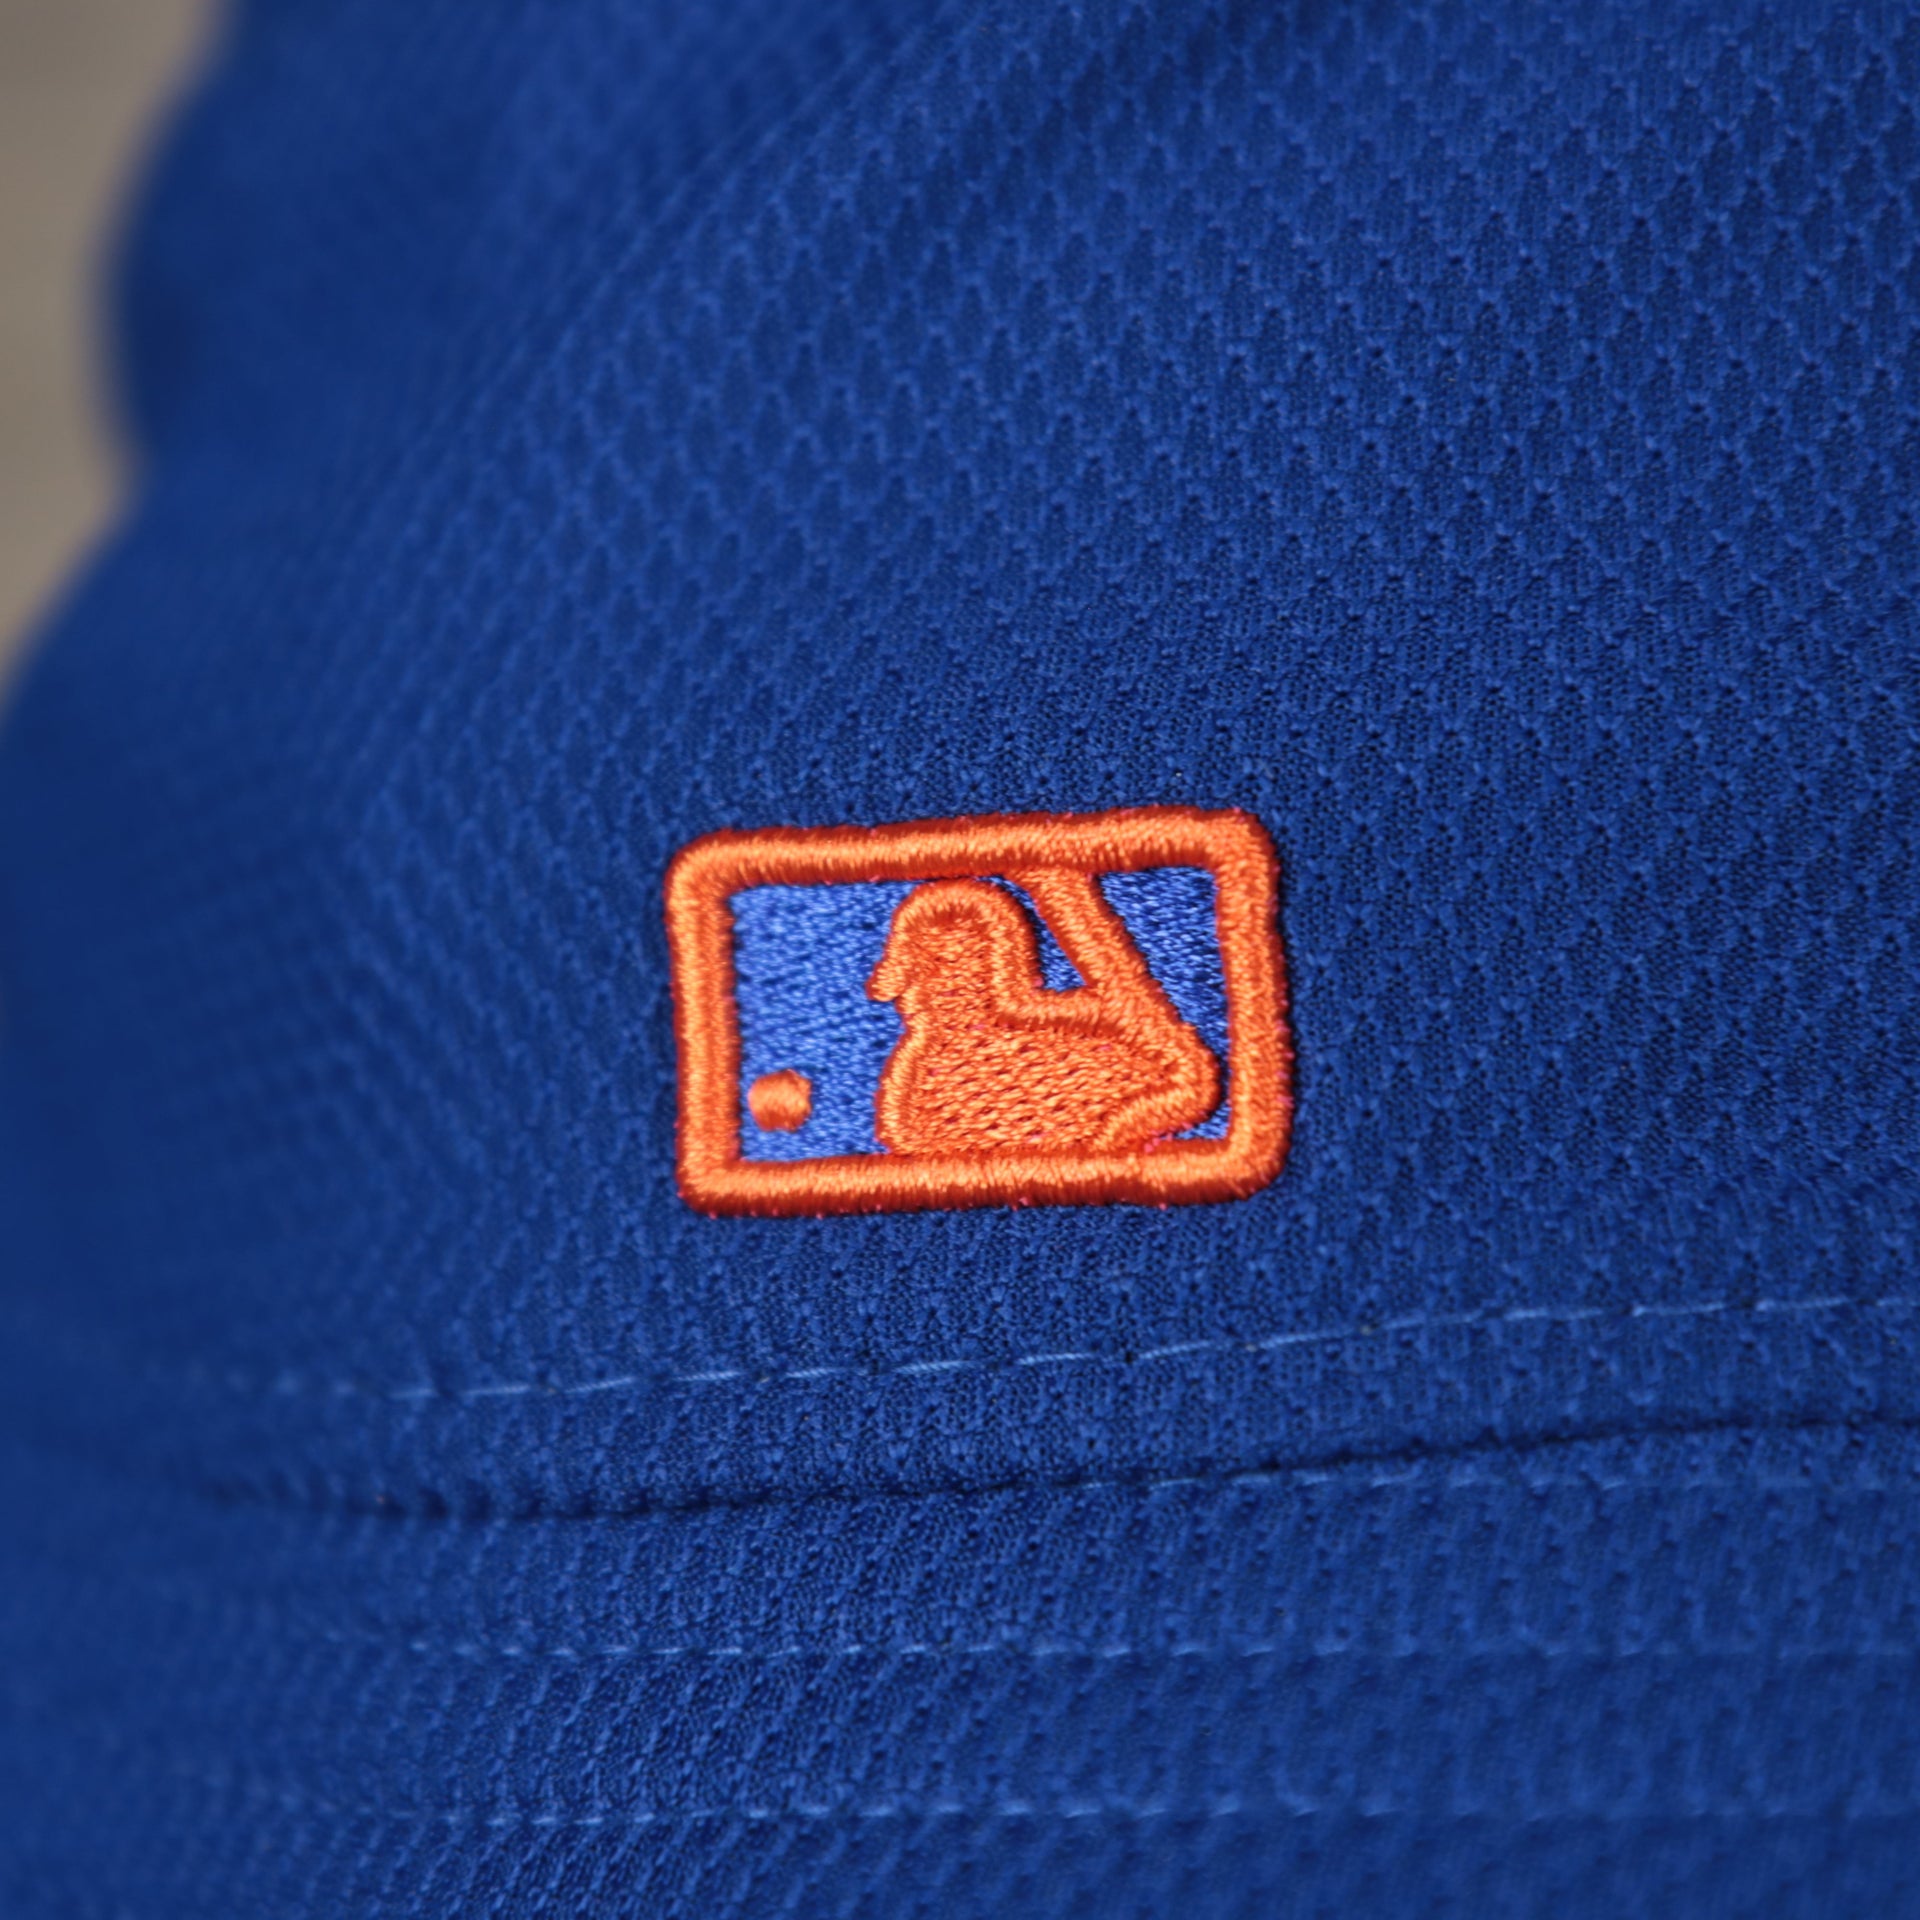 A close up of the MLB Batterman logo on the New York Mets  MLB 2022 Spring Training Onfield Bucket Hat